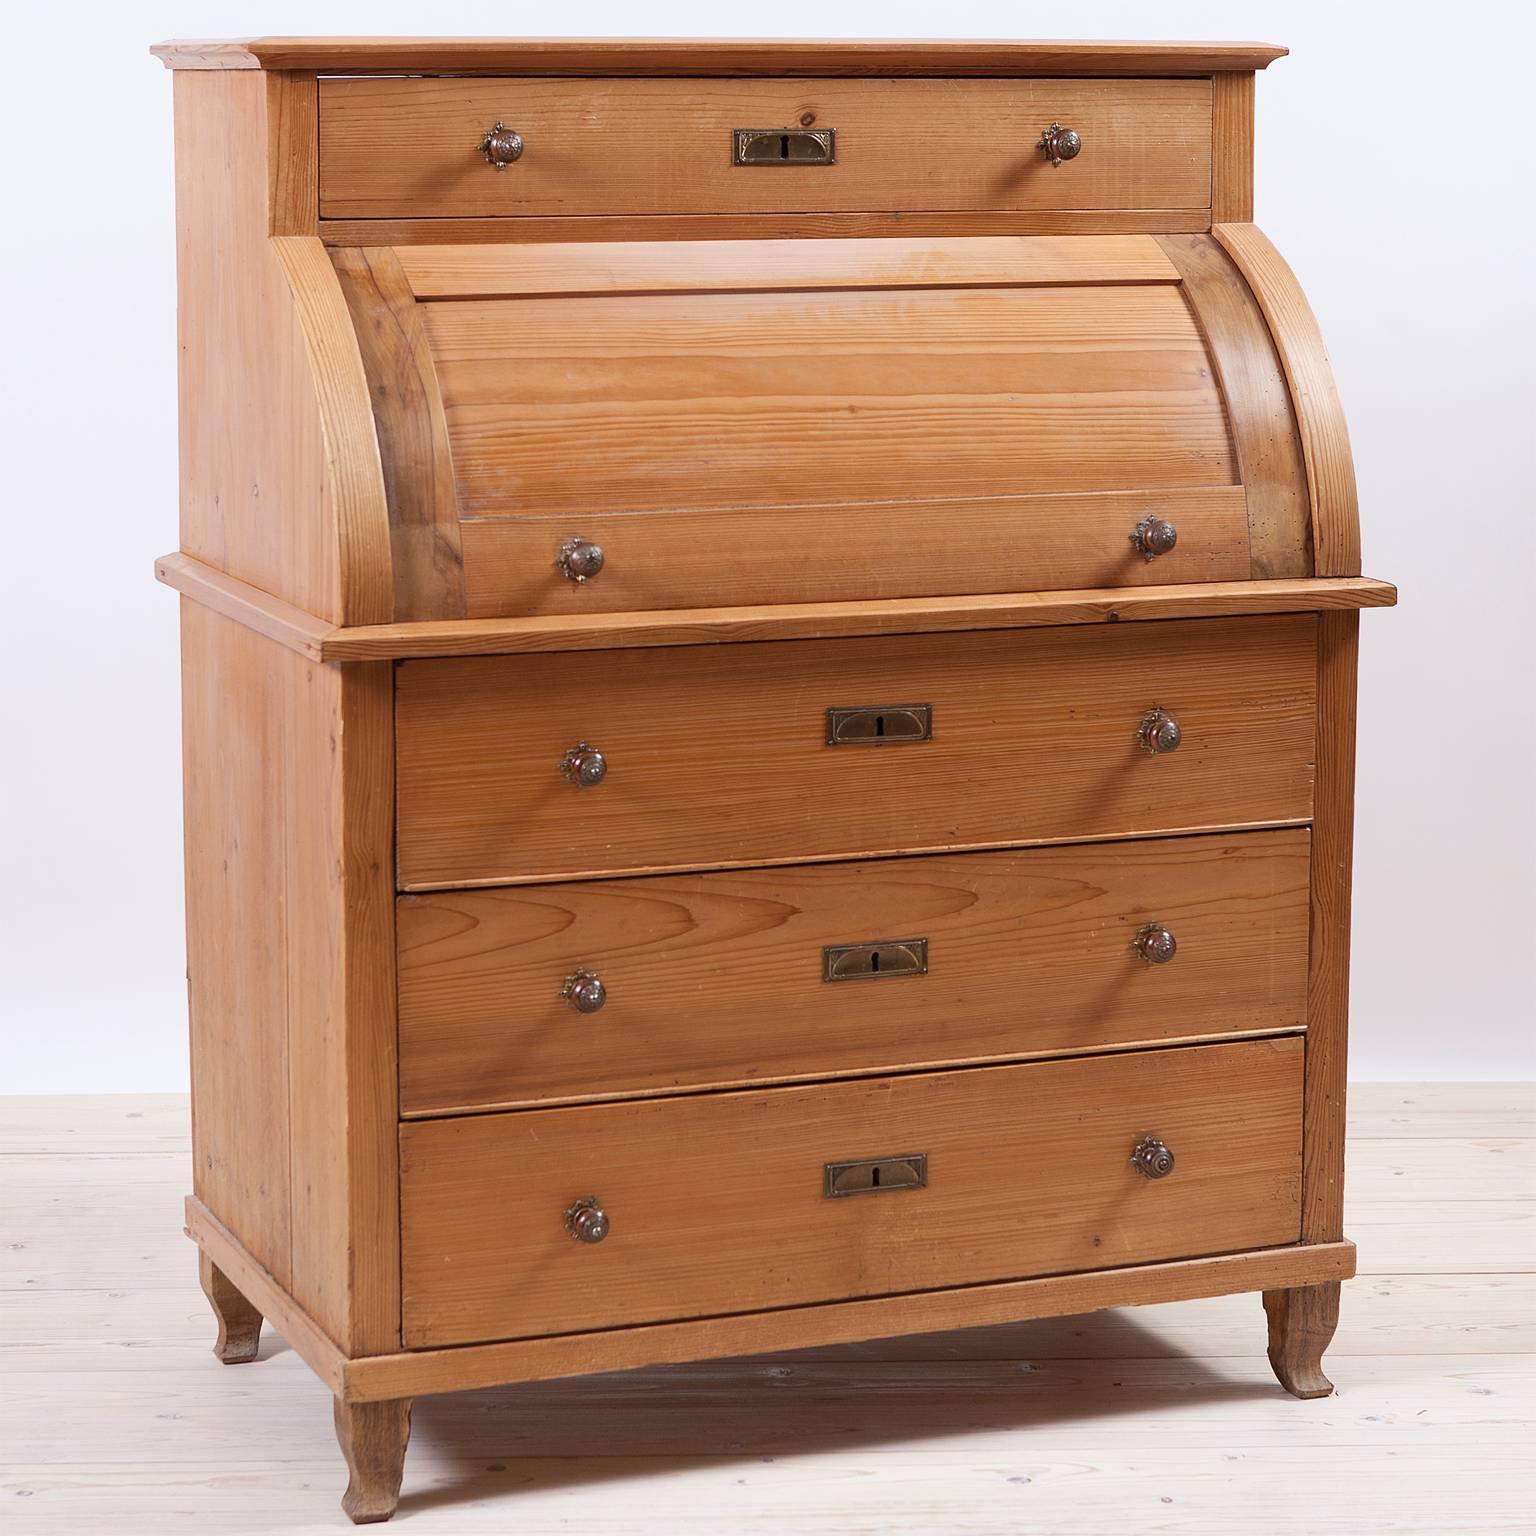 North German Provincial Biedermeier Secretary in Pine with Cylinder Top. A rare cylinder top pine secretary with Birch wood interior drawers, original pulls and birch pull out writing surface. Drawer pulls are turned fruit wood with nickle plated